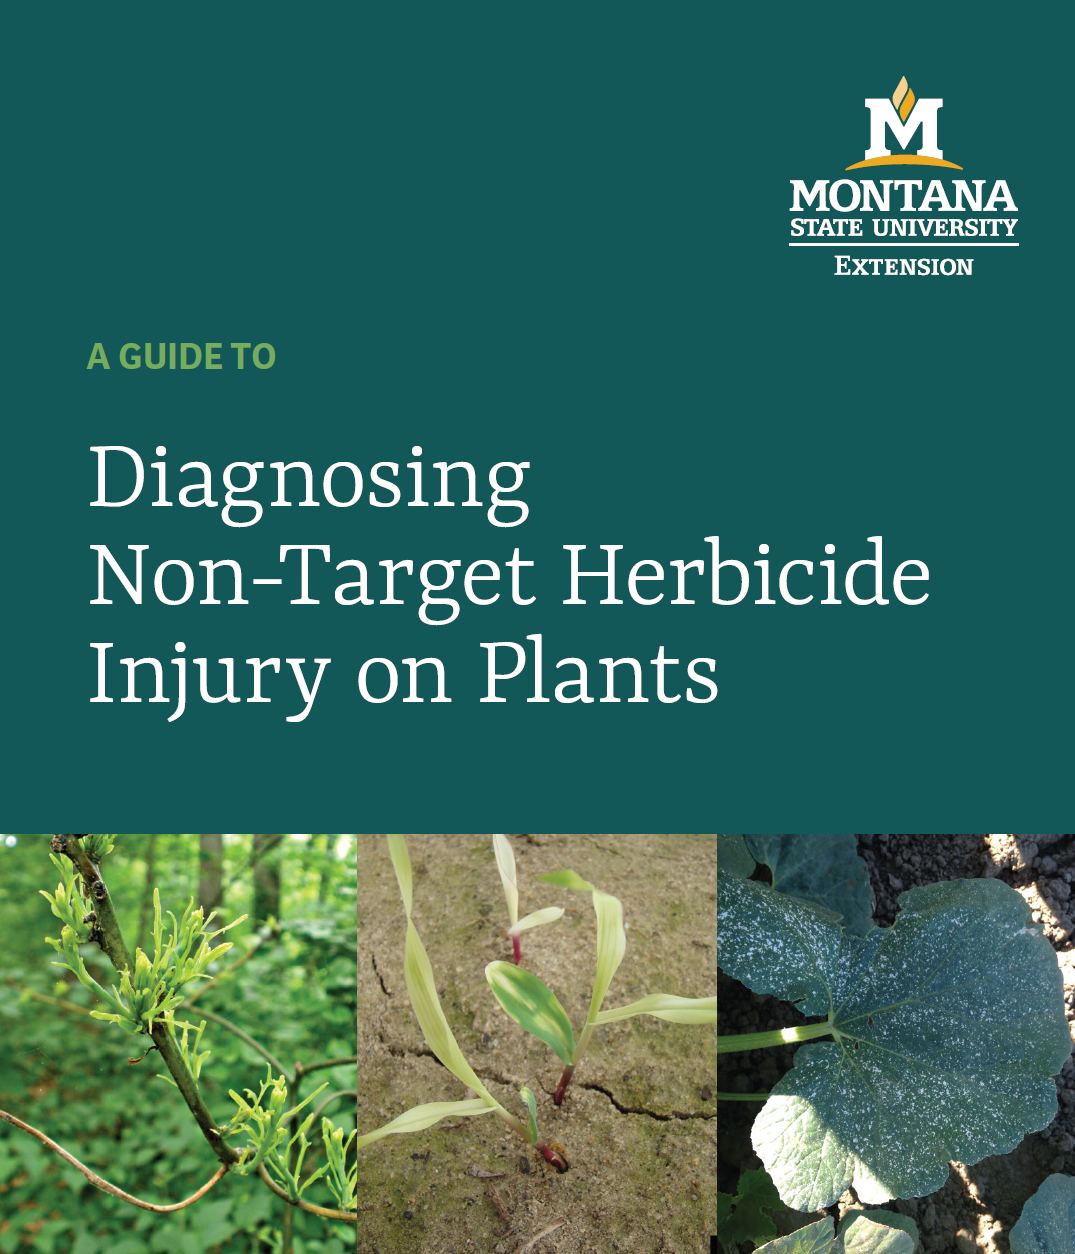 cover for the herbicide injury guide